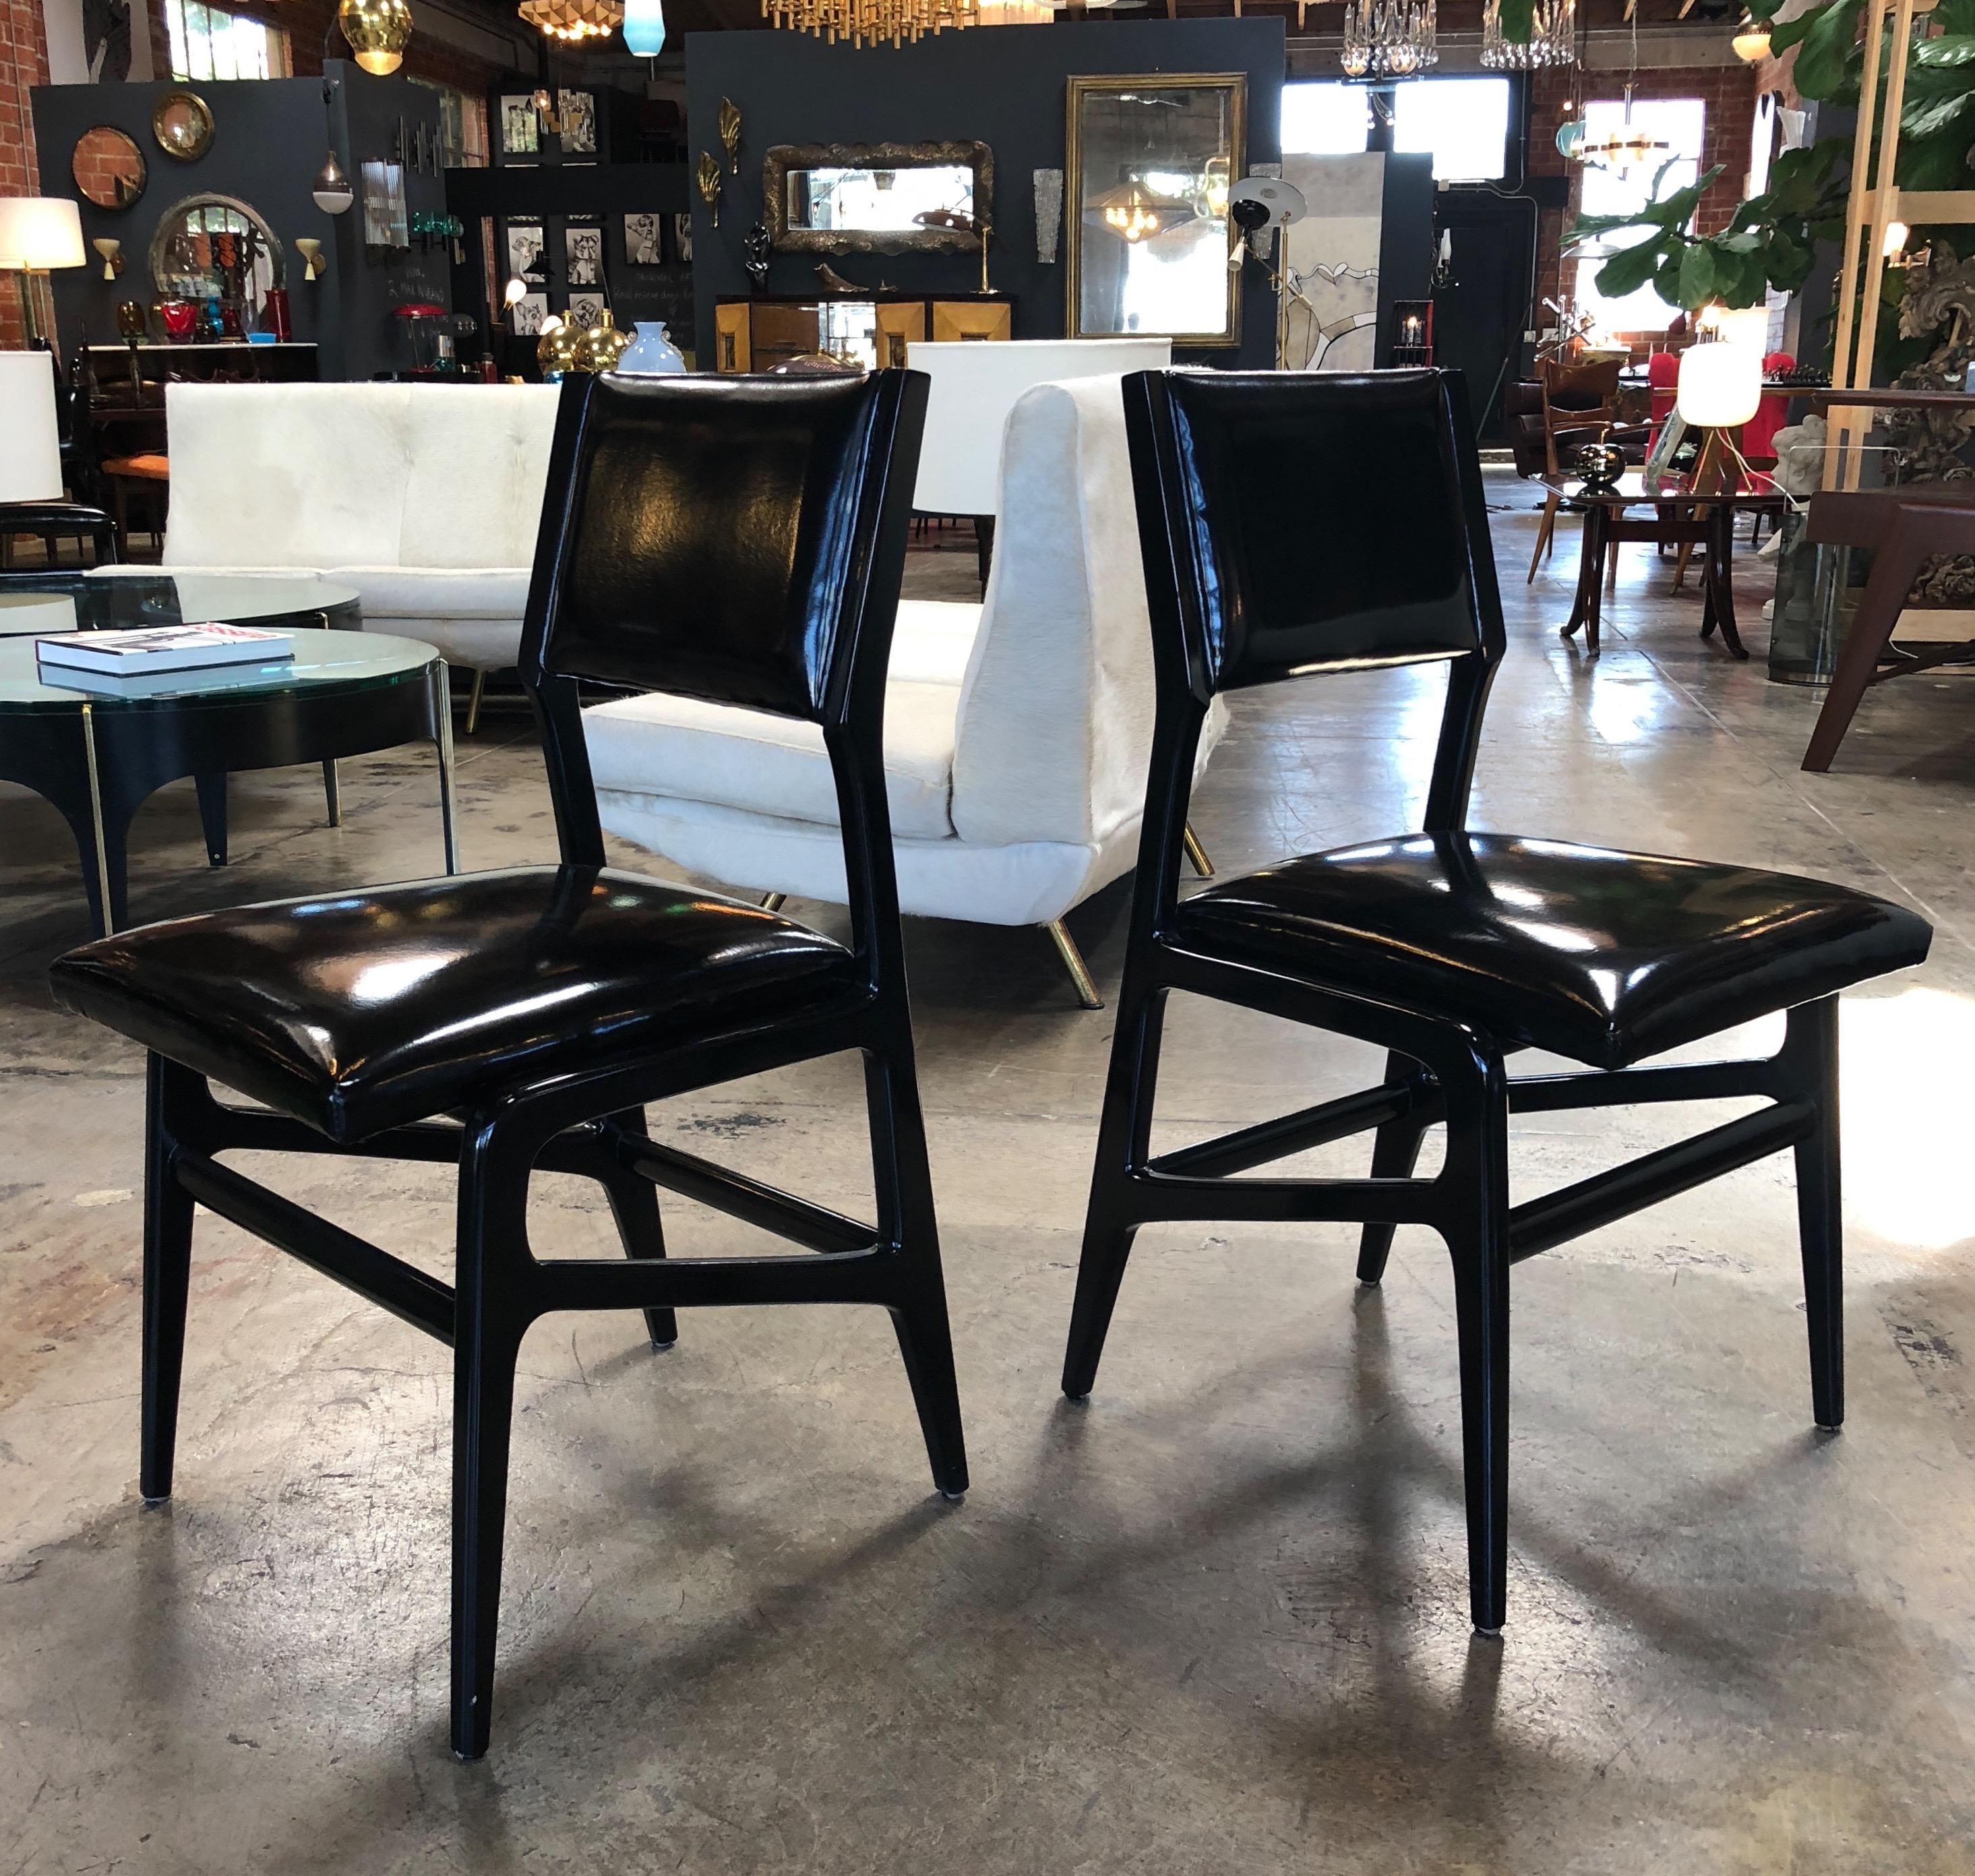 Pair of iconic Gio Ponti dining chairs.
Beautifully designed; item restored and ready to be shipped to you.